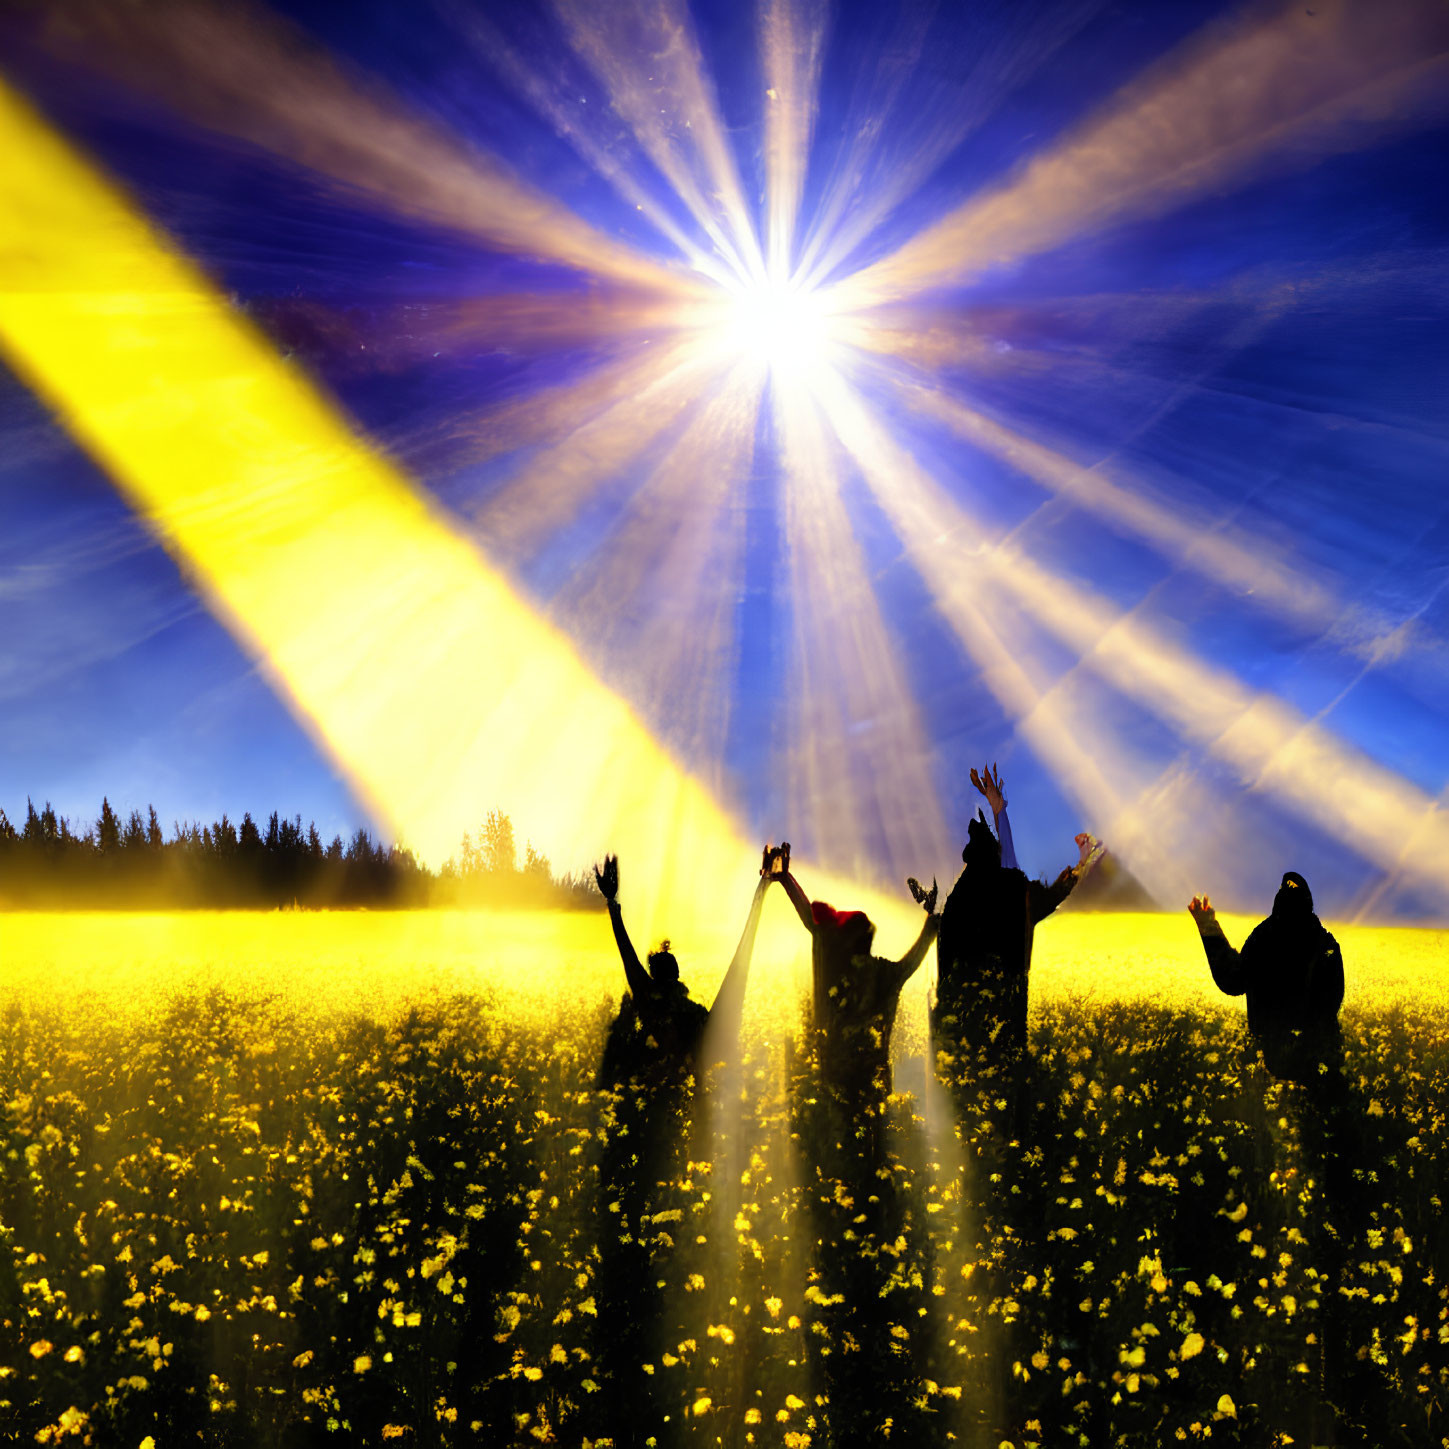 Group of People Celebrating in Yellow Flower Field Under Radiant Sun